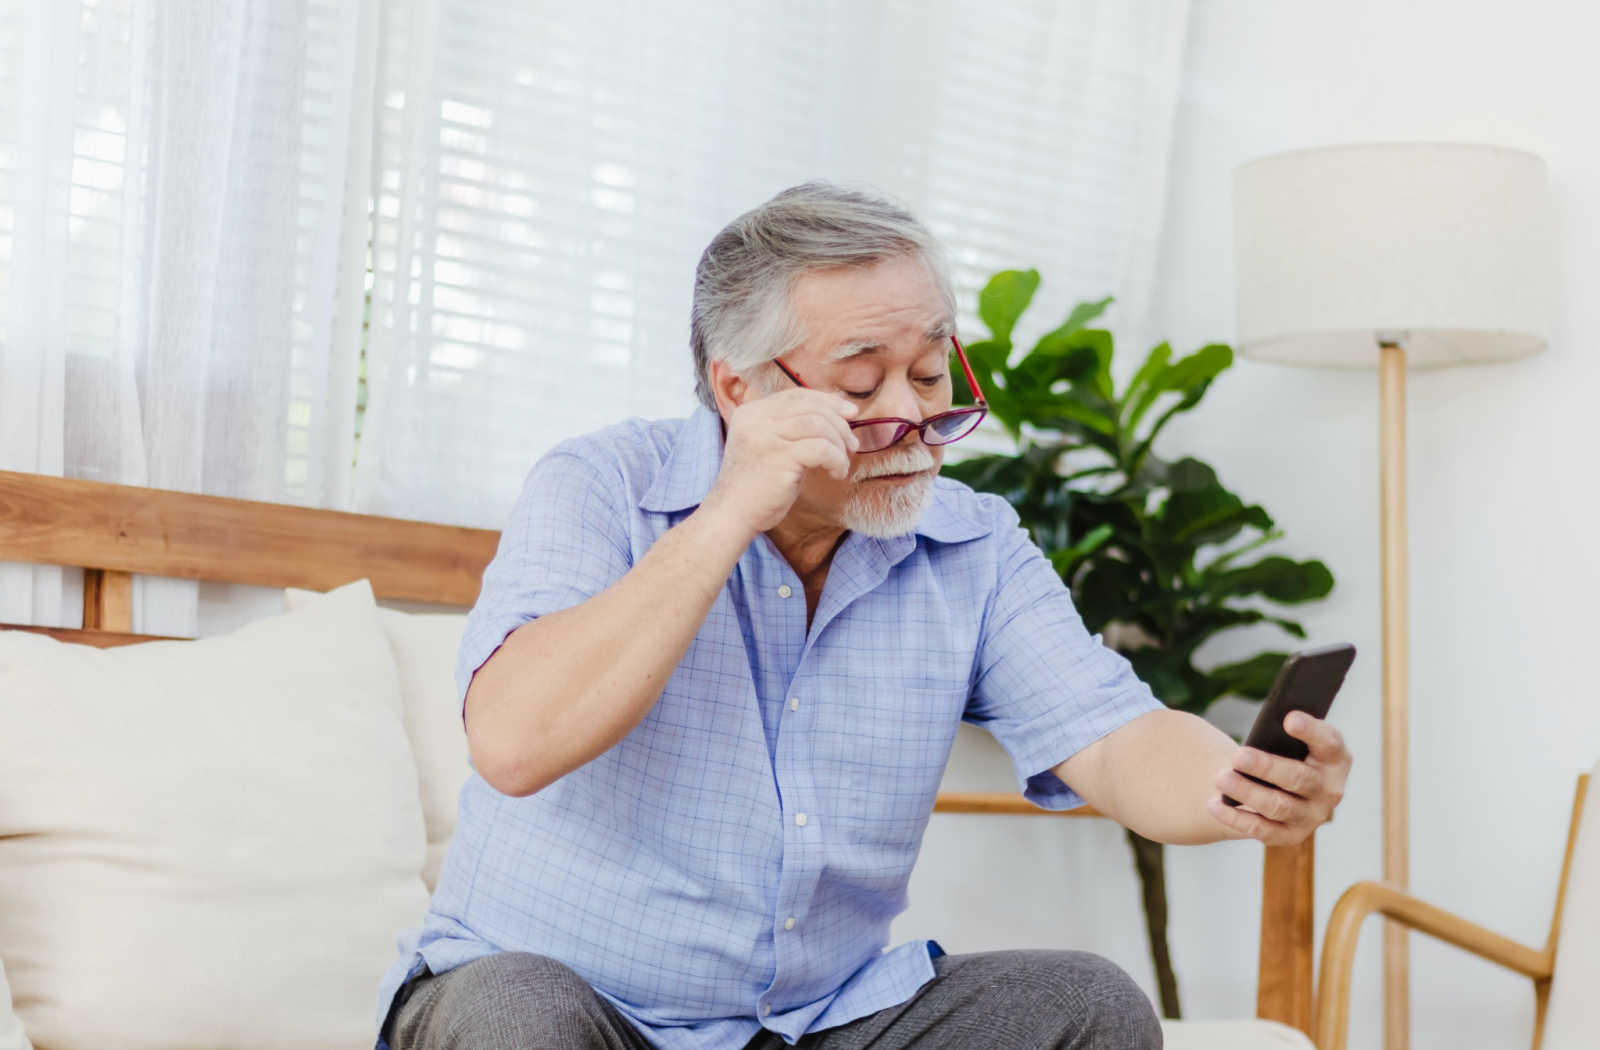 An elderly man in a blue shirt, sitting on a sofa, lifting his glasses with one hand while holding the phone with the other in an attempt to read more clearly.